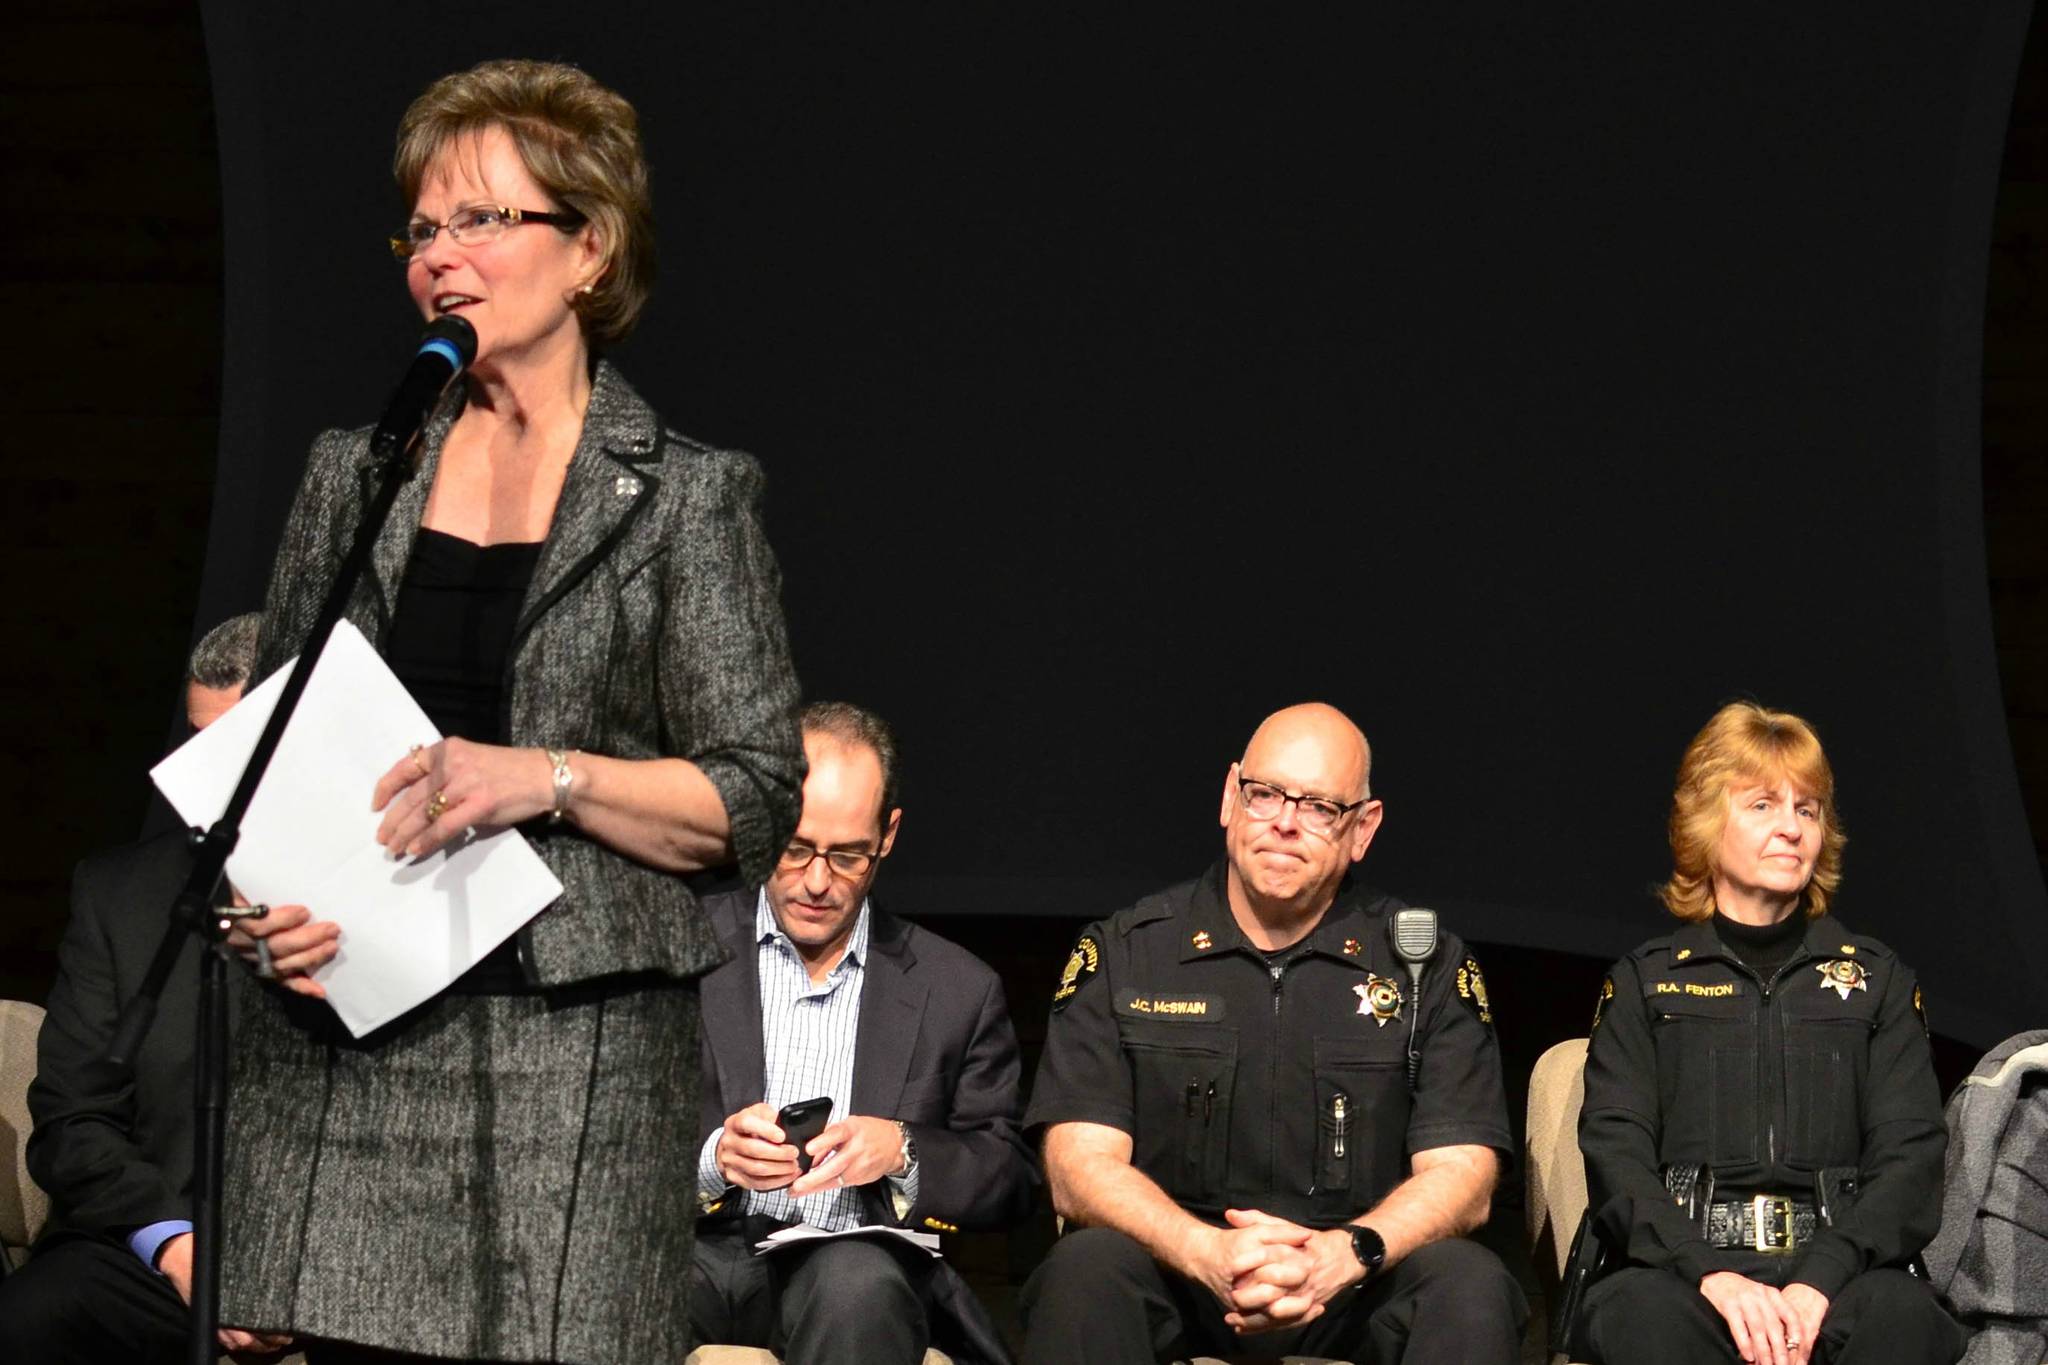 King County Councilmember Kathy Lambert leads the discussion at an informational opioid event on April 9. Photo by Josh Kelety